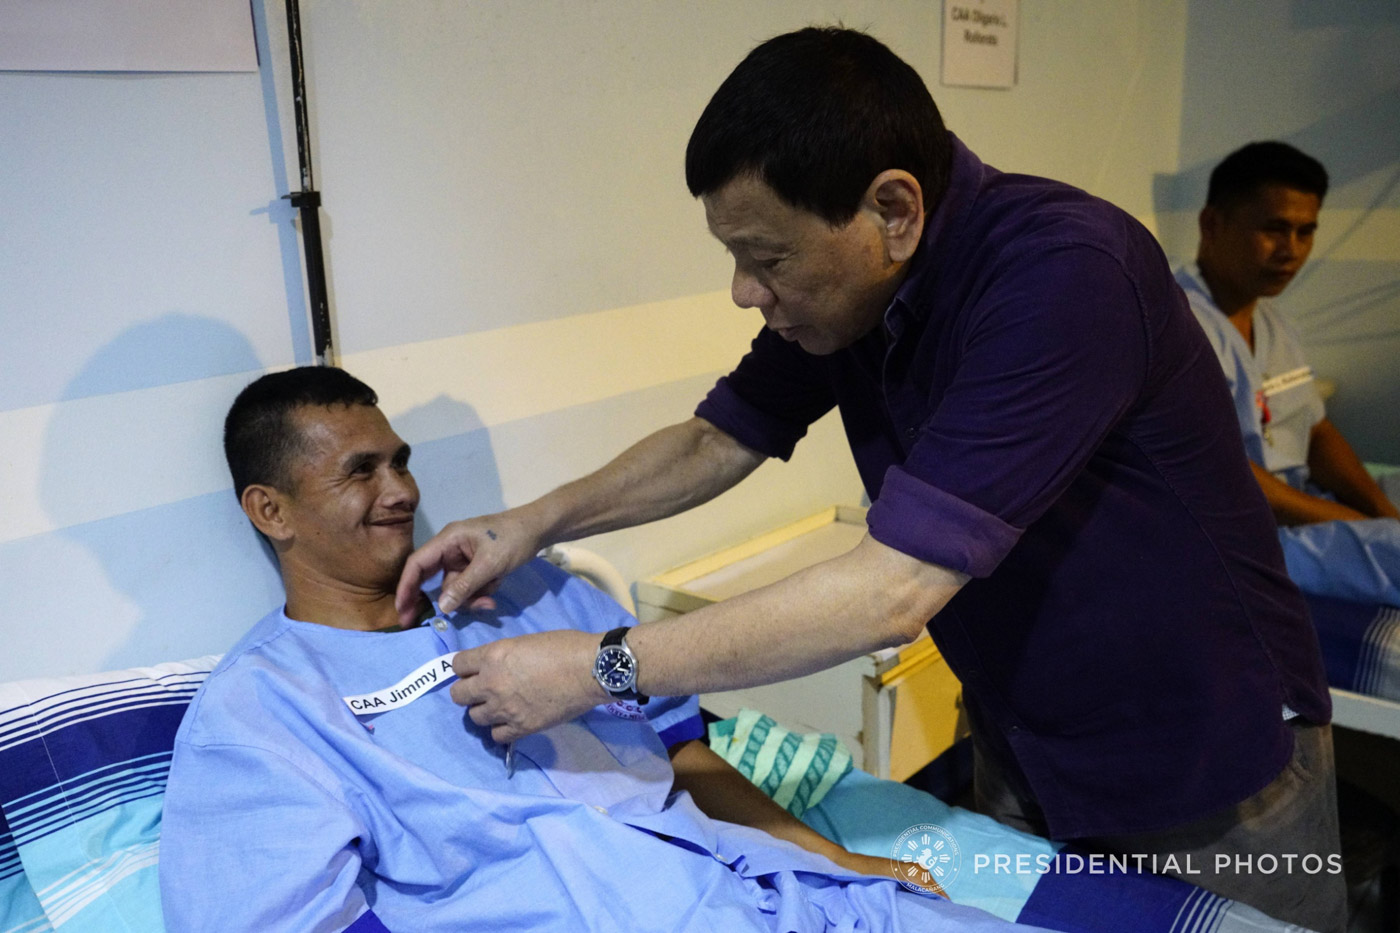 TRIBUTE TO LAPU-LAPU. President Rodrigo Duterte confers the Order of Lapu-Lapu Kampilan Medal on CAFGU Active Auxiliary Jimmy Gonzaga during his visit to the wounded soldiers at Camp Panacan Station Hospital in Davao City. Malacañang photo 